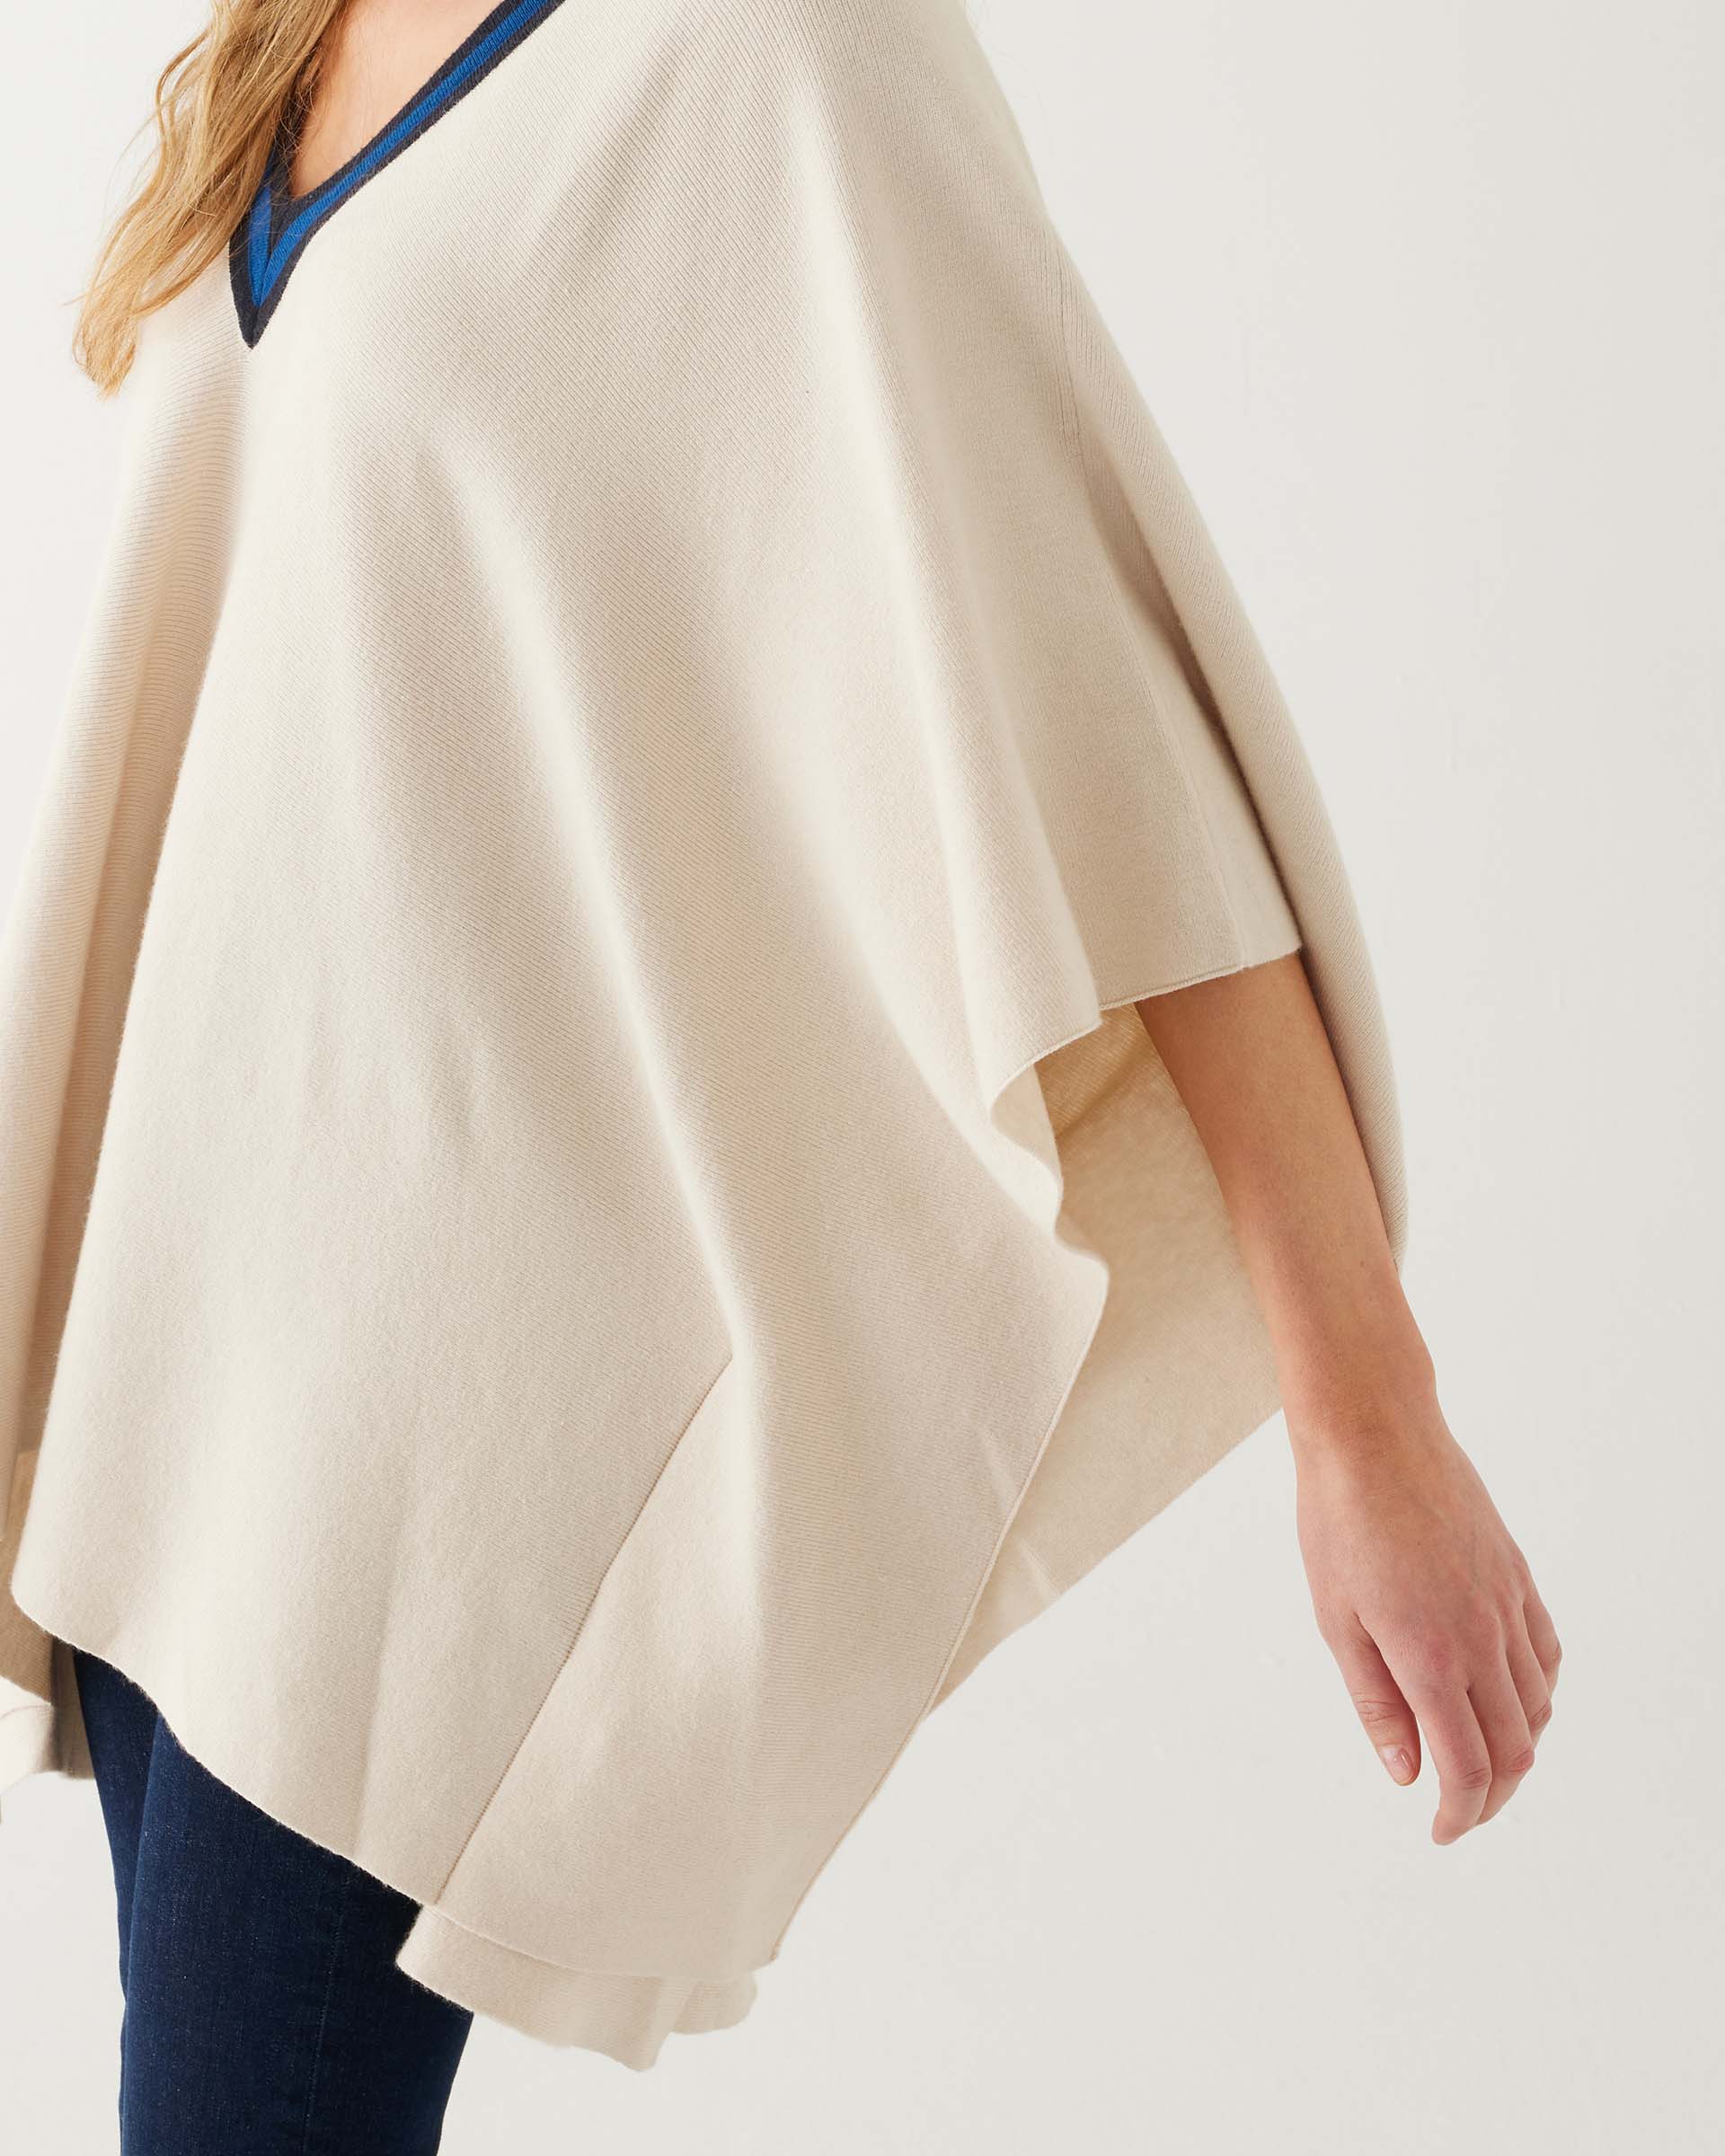 closeup of arm opening on woman wearing mersea Anywear v new poncho in birch beige with blue collar details